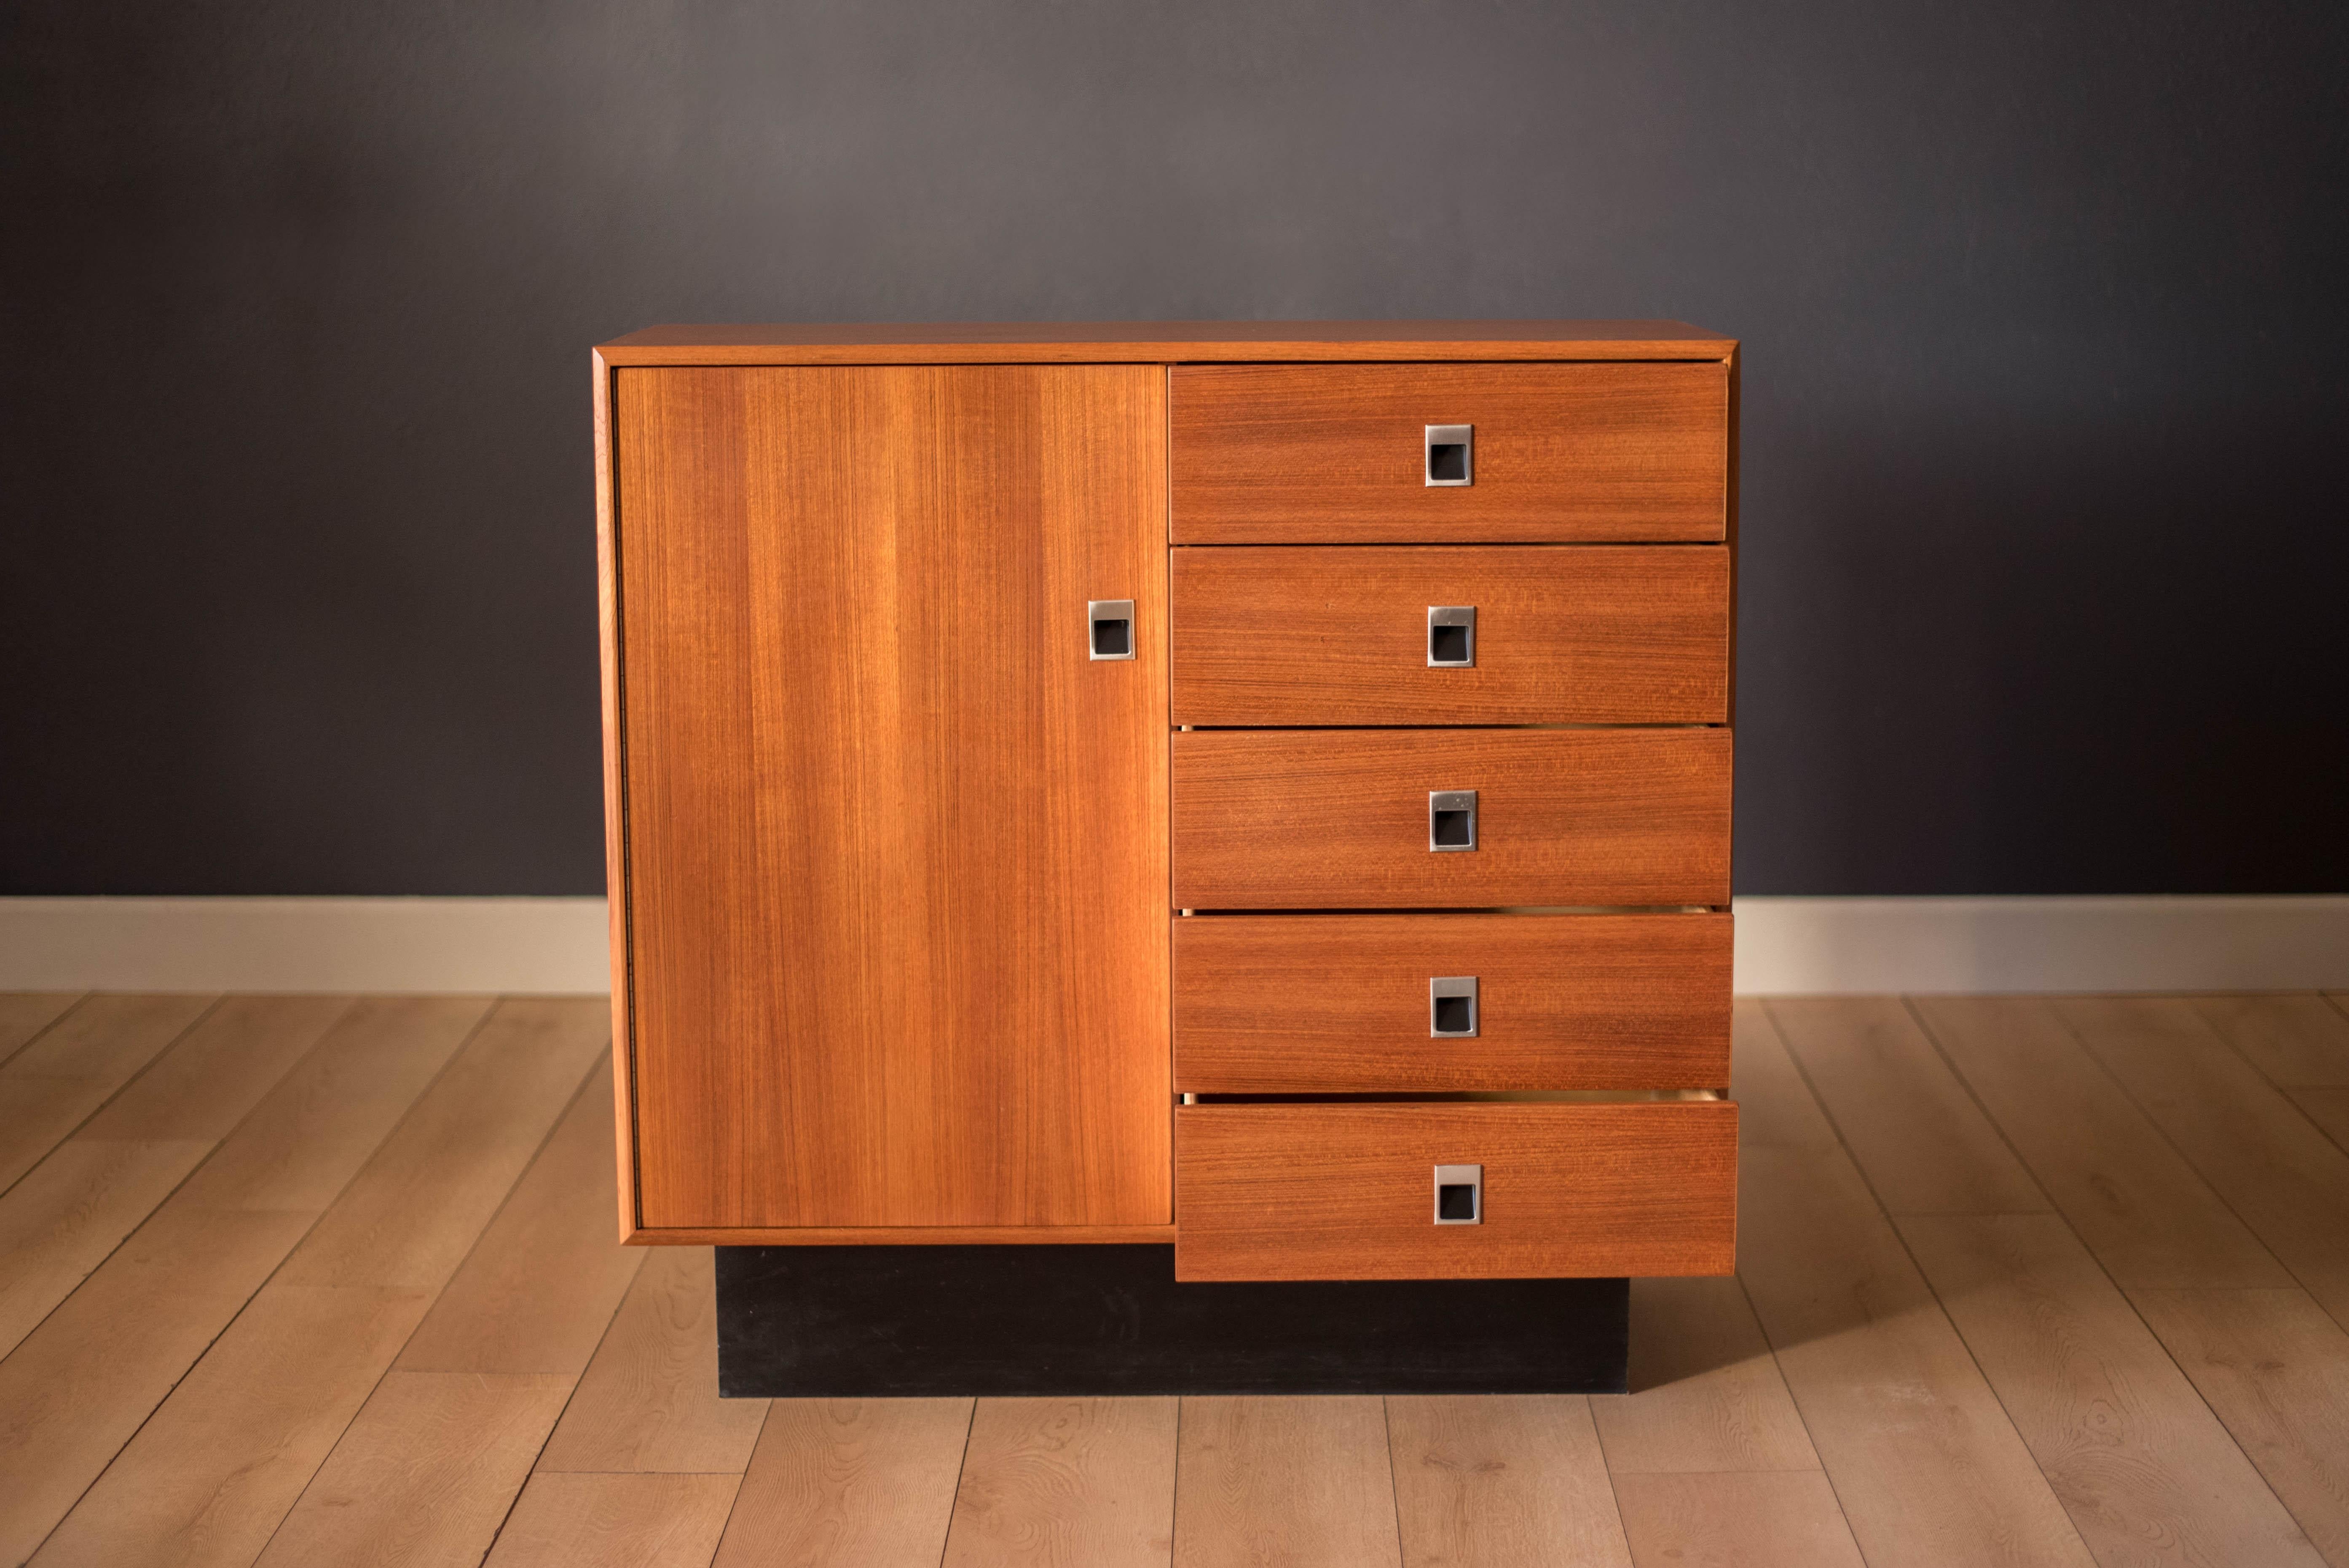 Mid-Century Modern gentleman's dresser in teak, circa 1970s. This piece includes five spacious drawers and an open storage cabinet lined in mahogany including two adjustable shelves. Modernist style hardware is made of polished aluminum and the